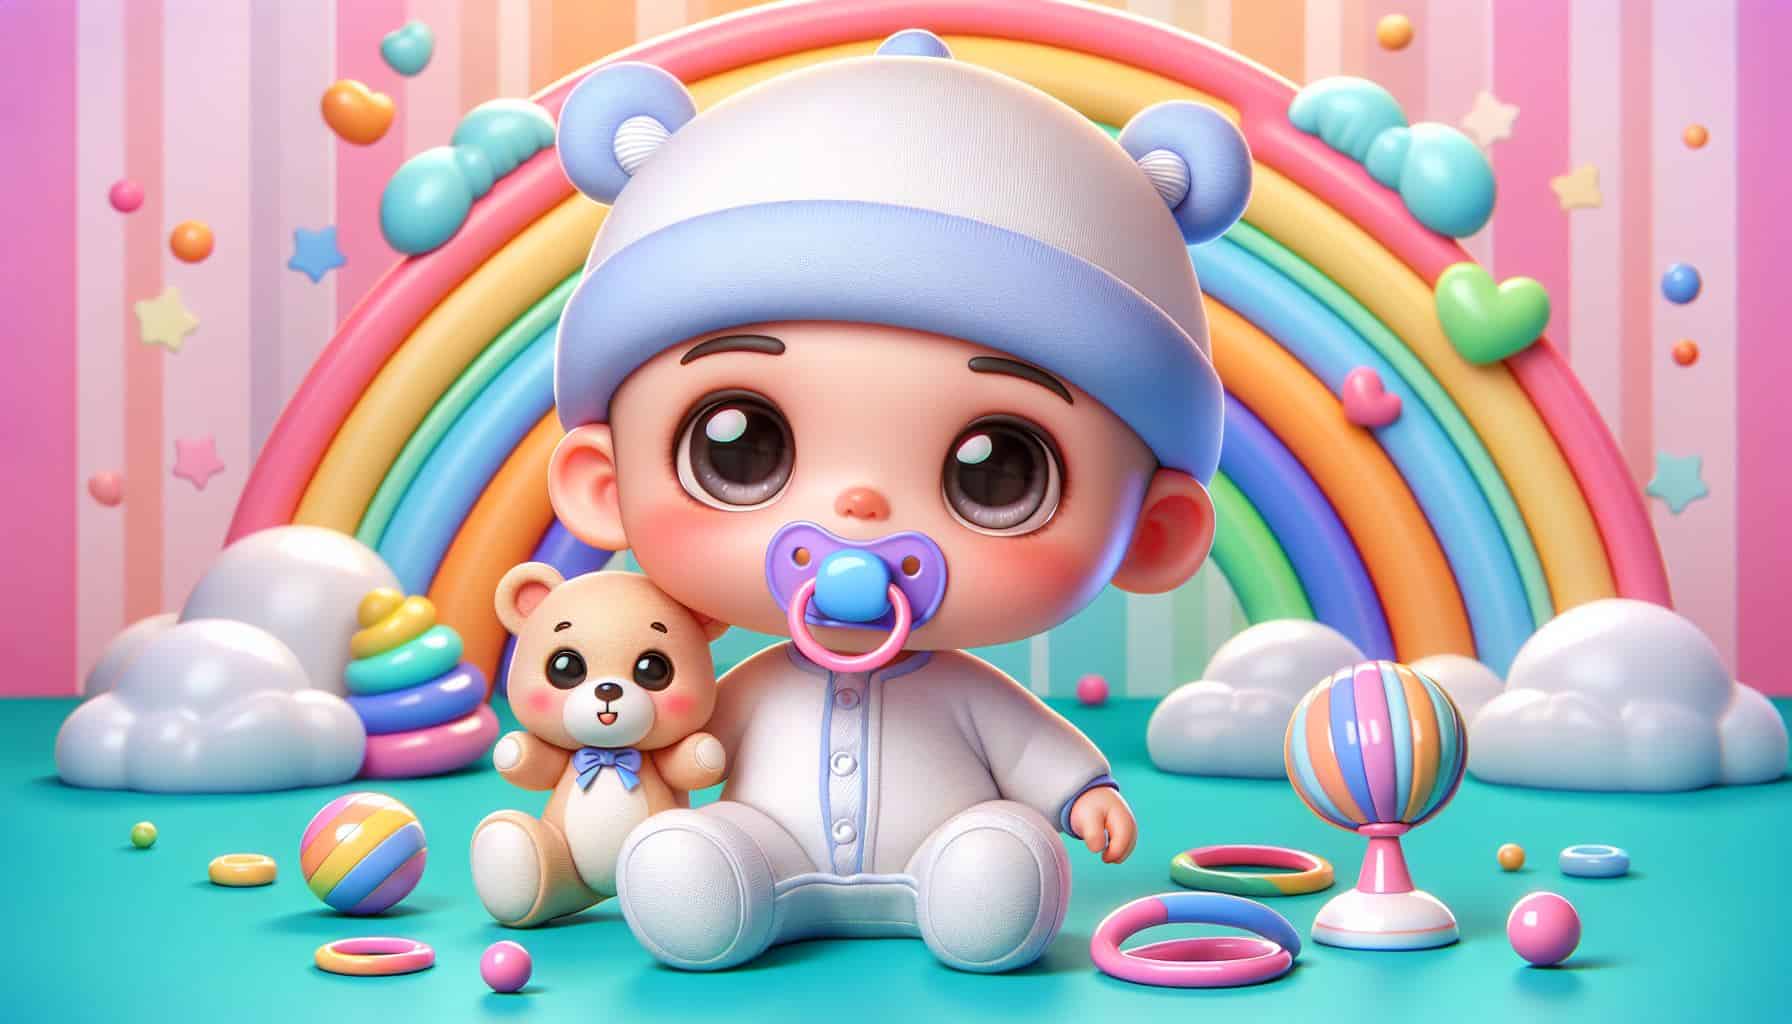 Cartoon baby with a pacifier in their mouth and a teddy bear sitting nearby